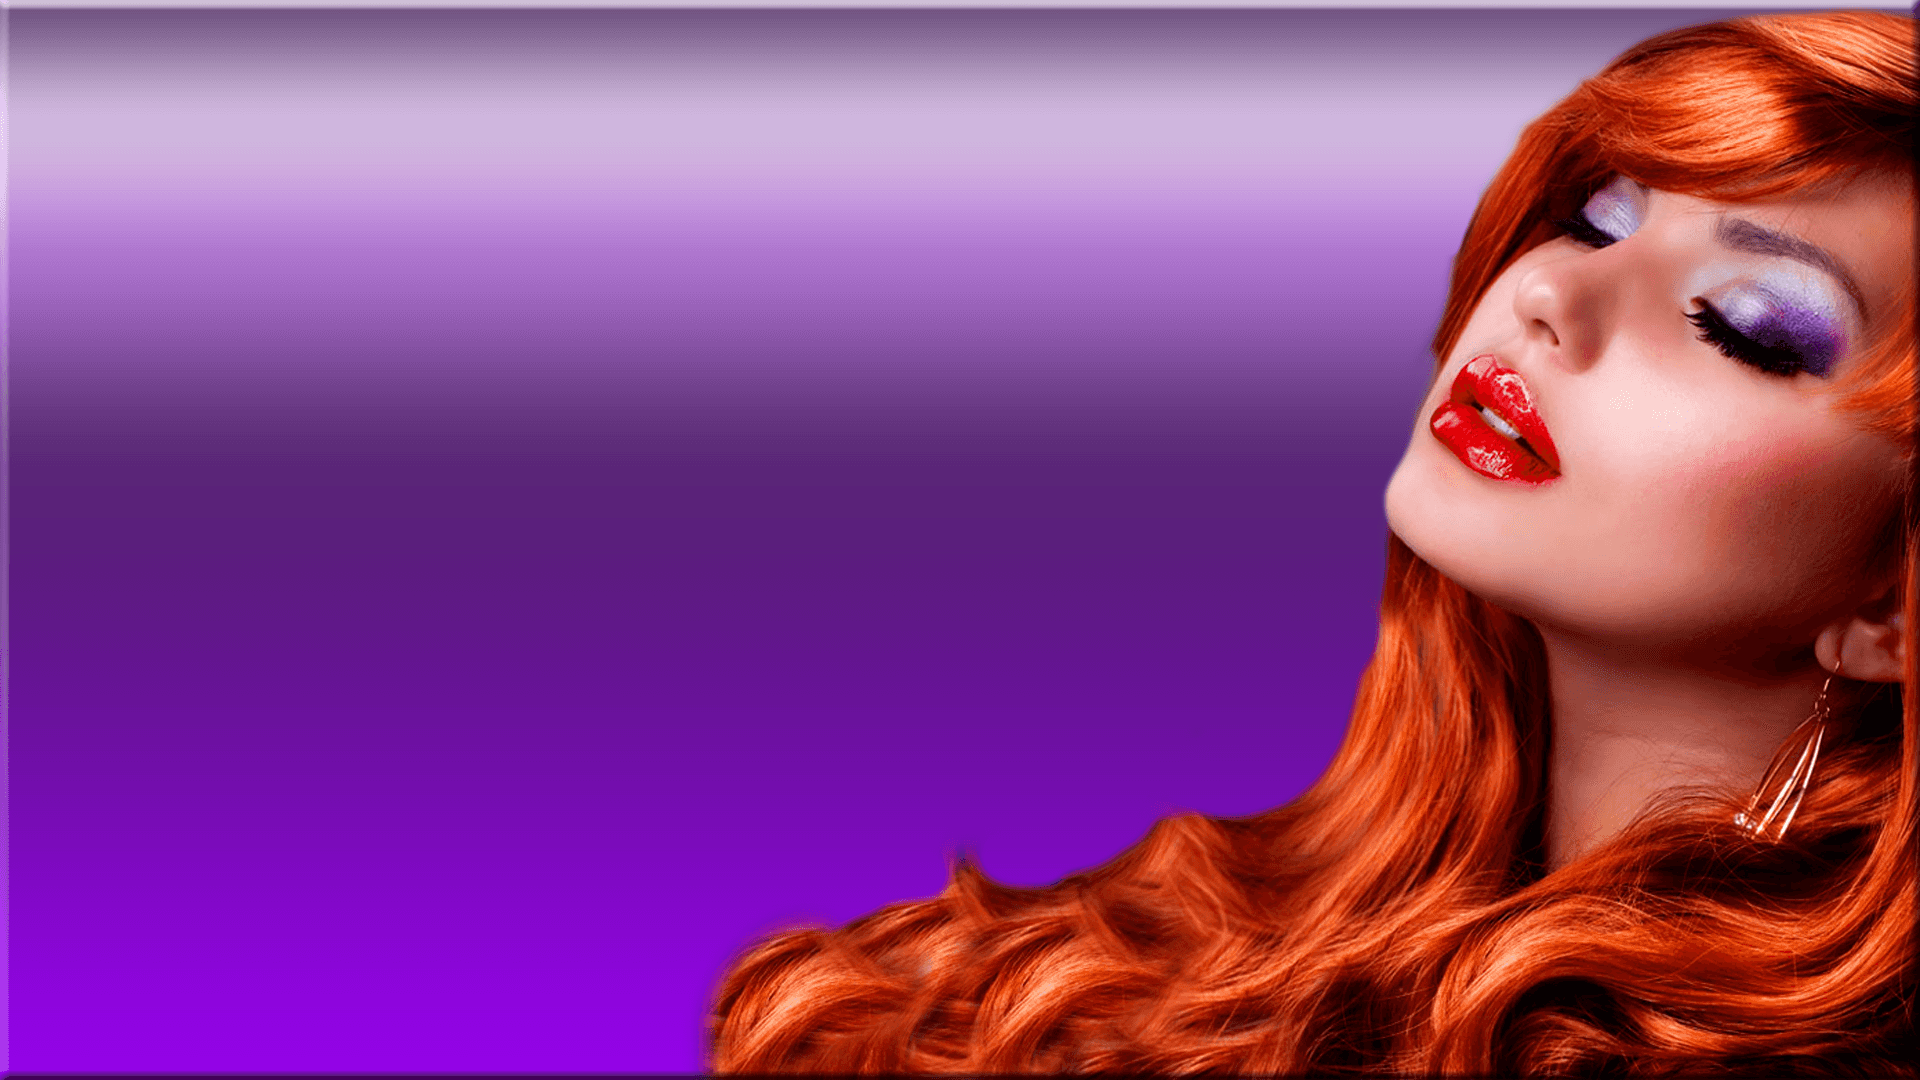 A Woman With Red Hair And Purple Background